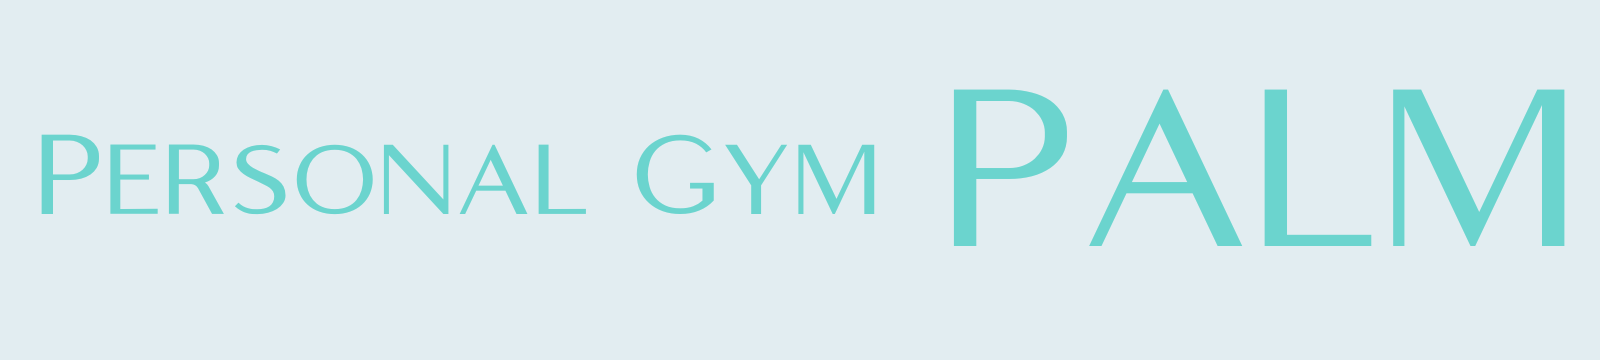 PersonalGym PALM